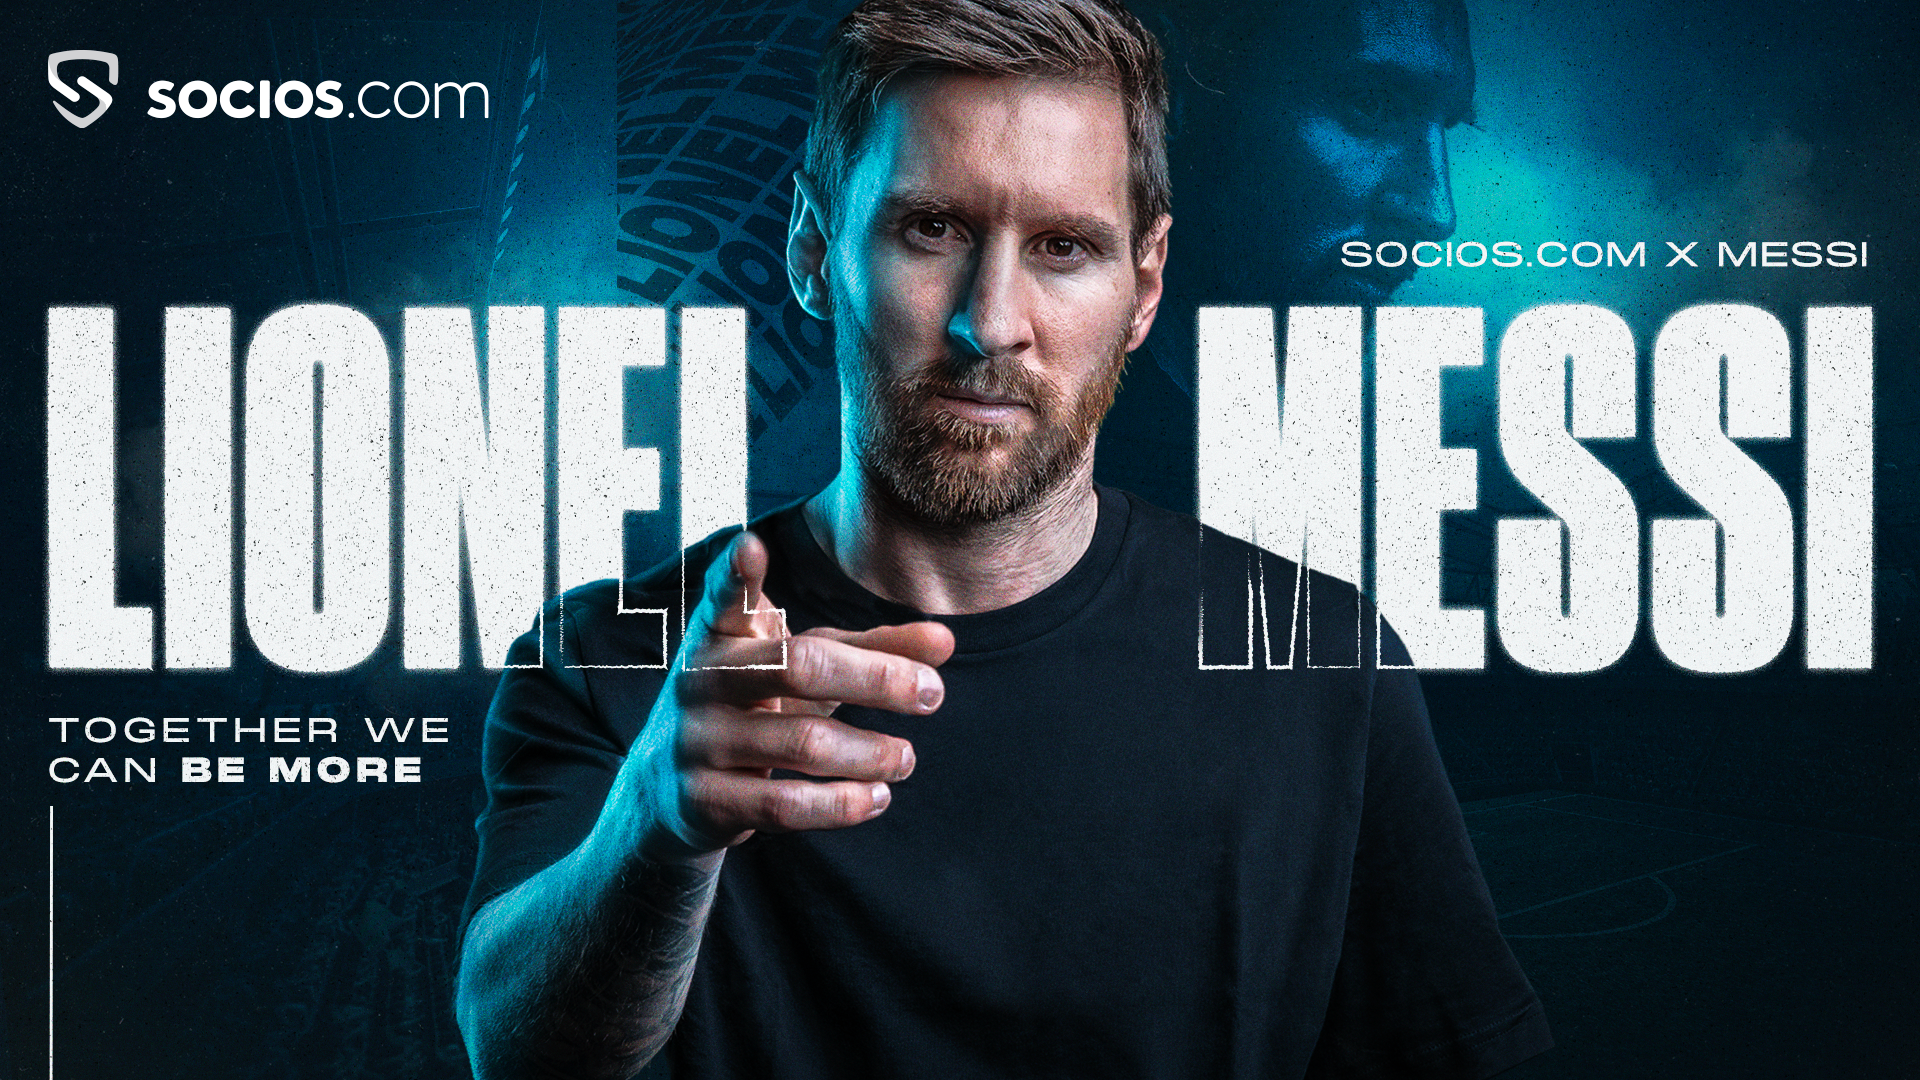 Lionel Messi becomes the global ambassador of a popular digital currency brand - Photo 1.